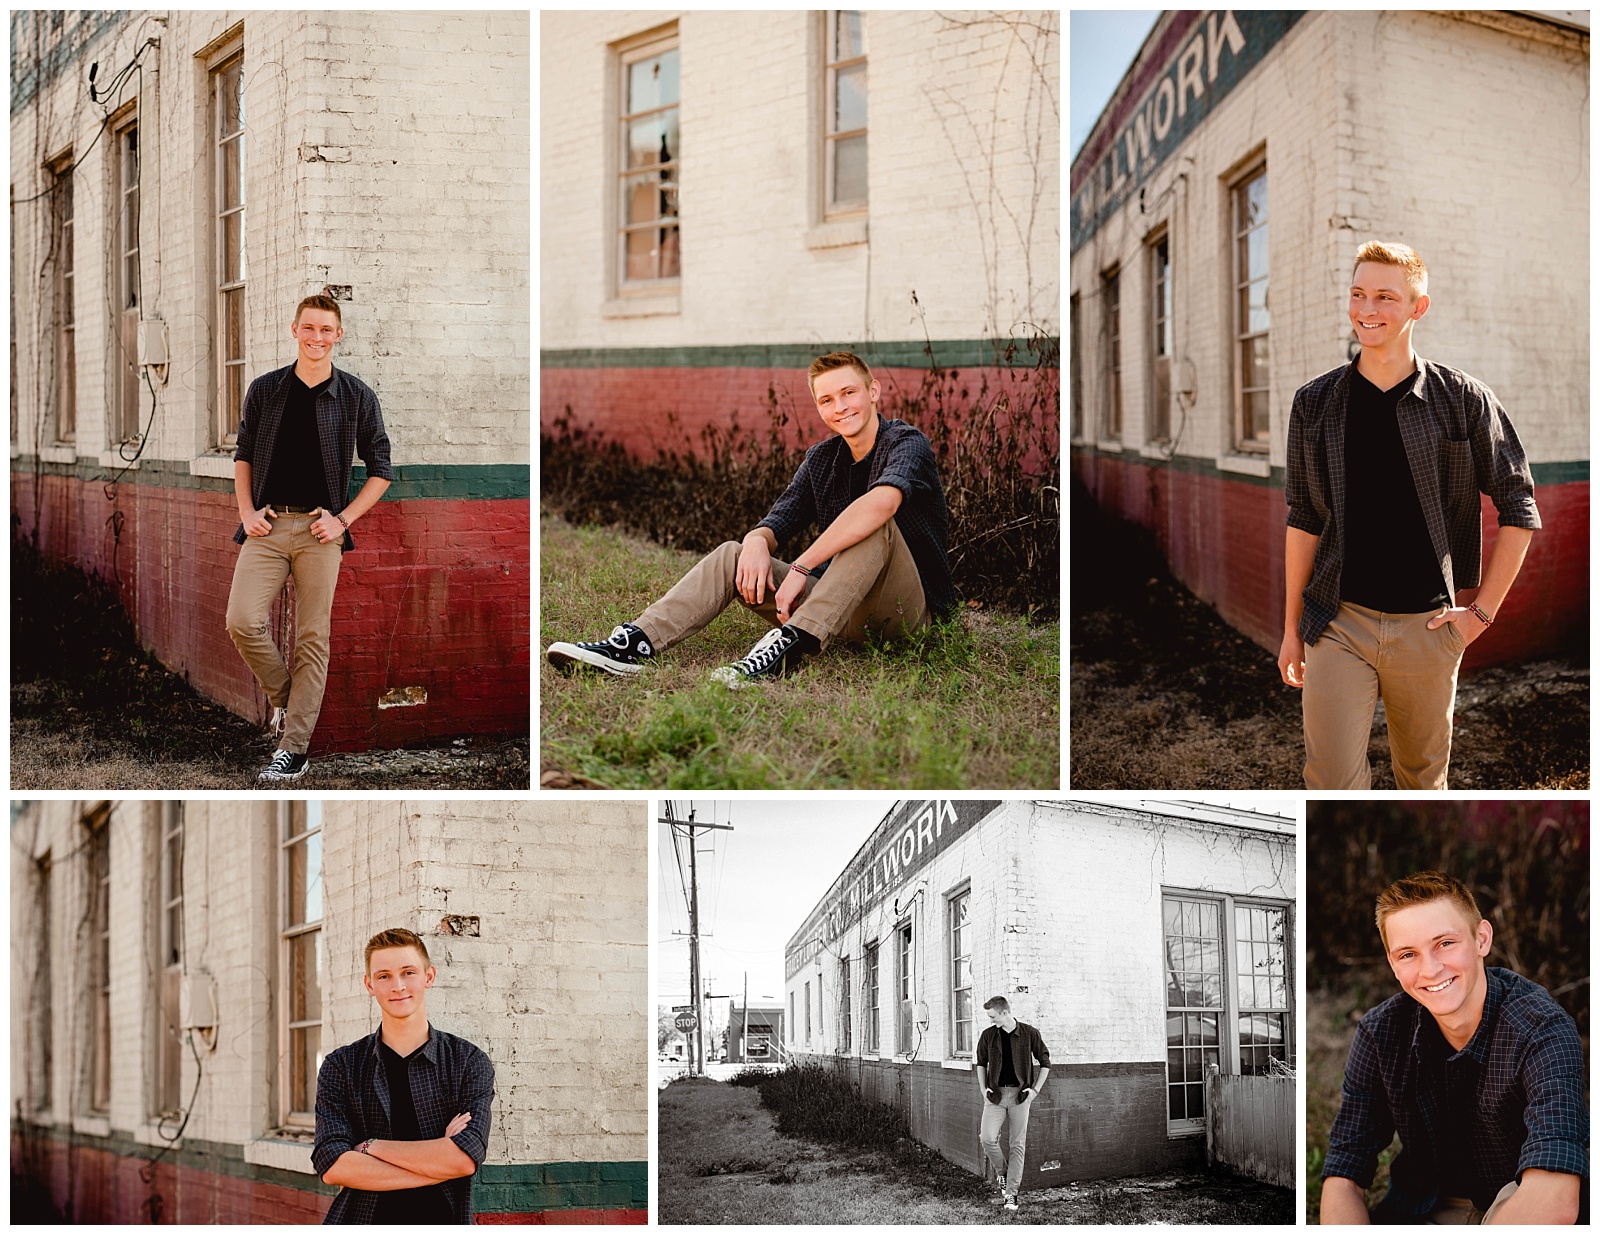 Rustic senior portraits for Tallahassee high school senior with old buildings.